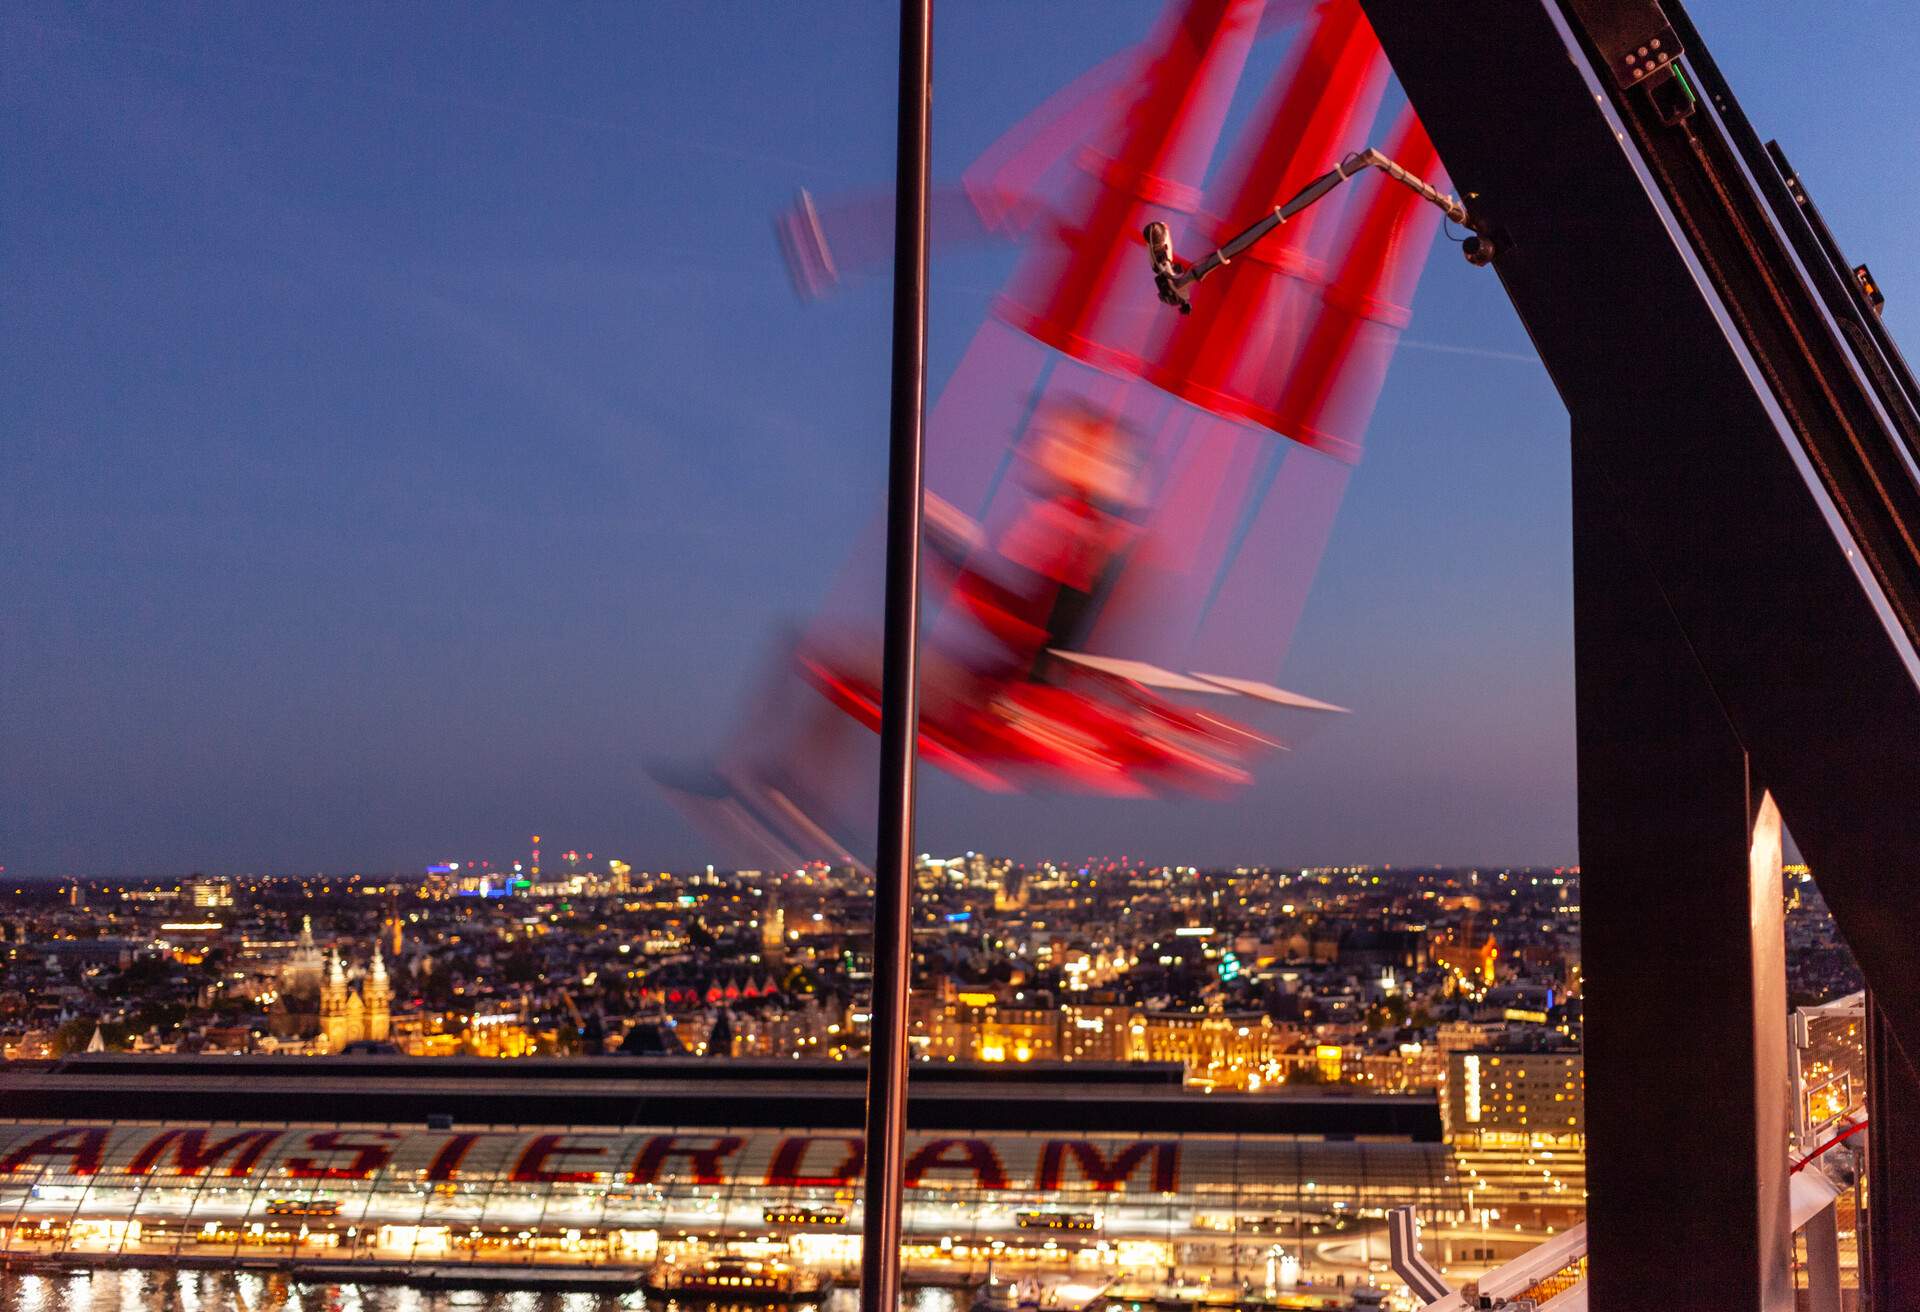 A blurry silhouette of a person on a big red swing with a view of Amsterdam city by night